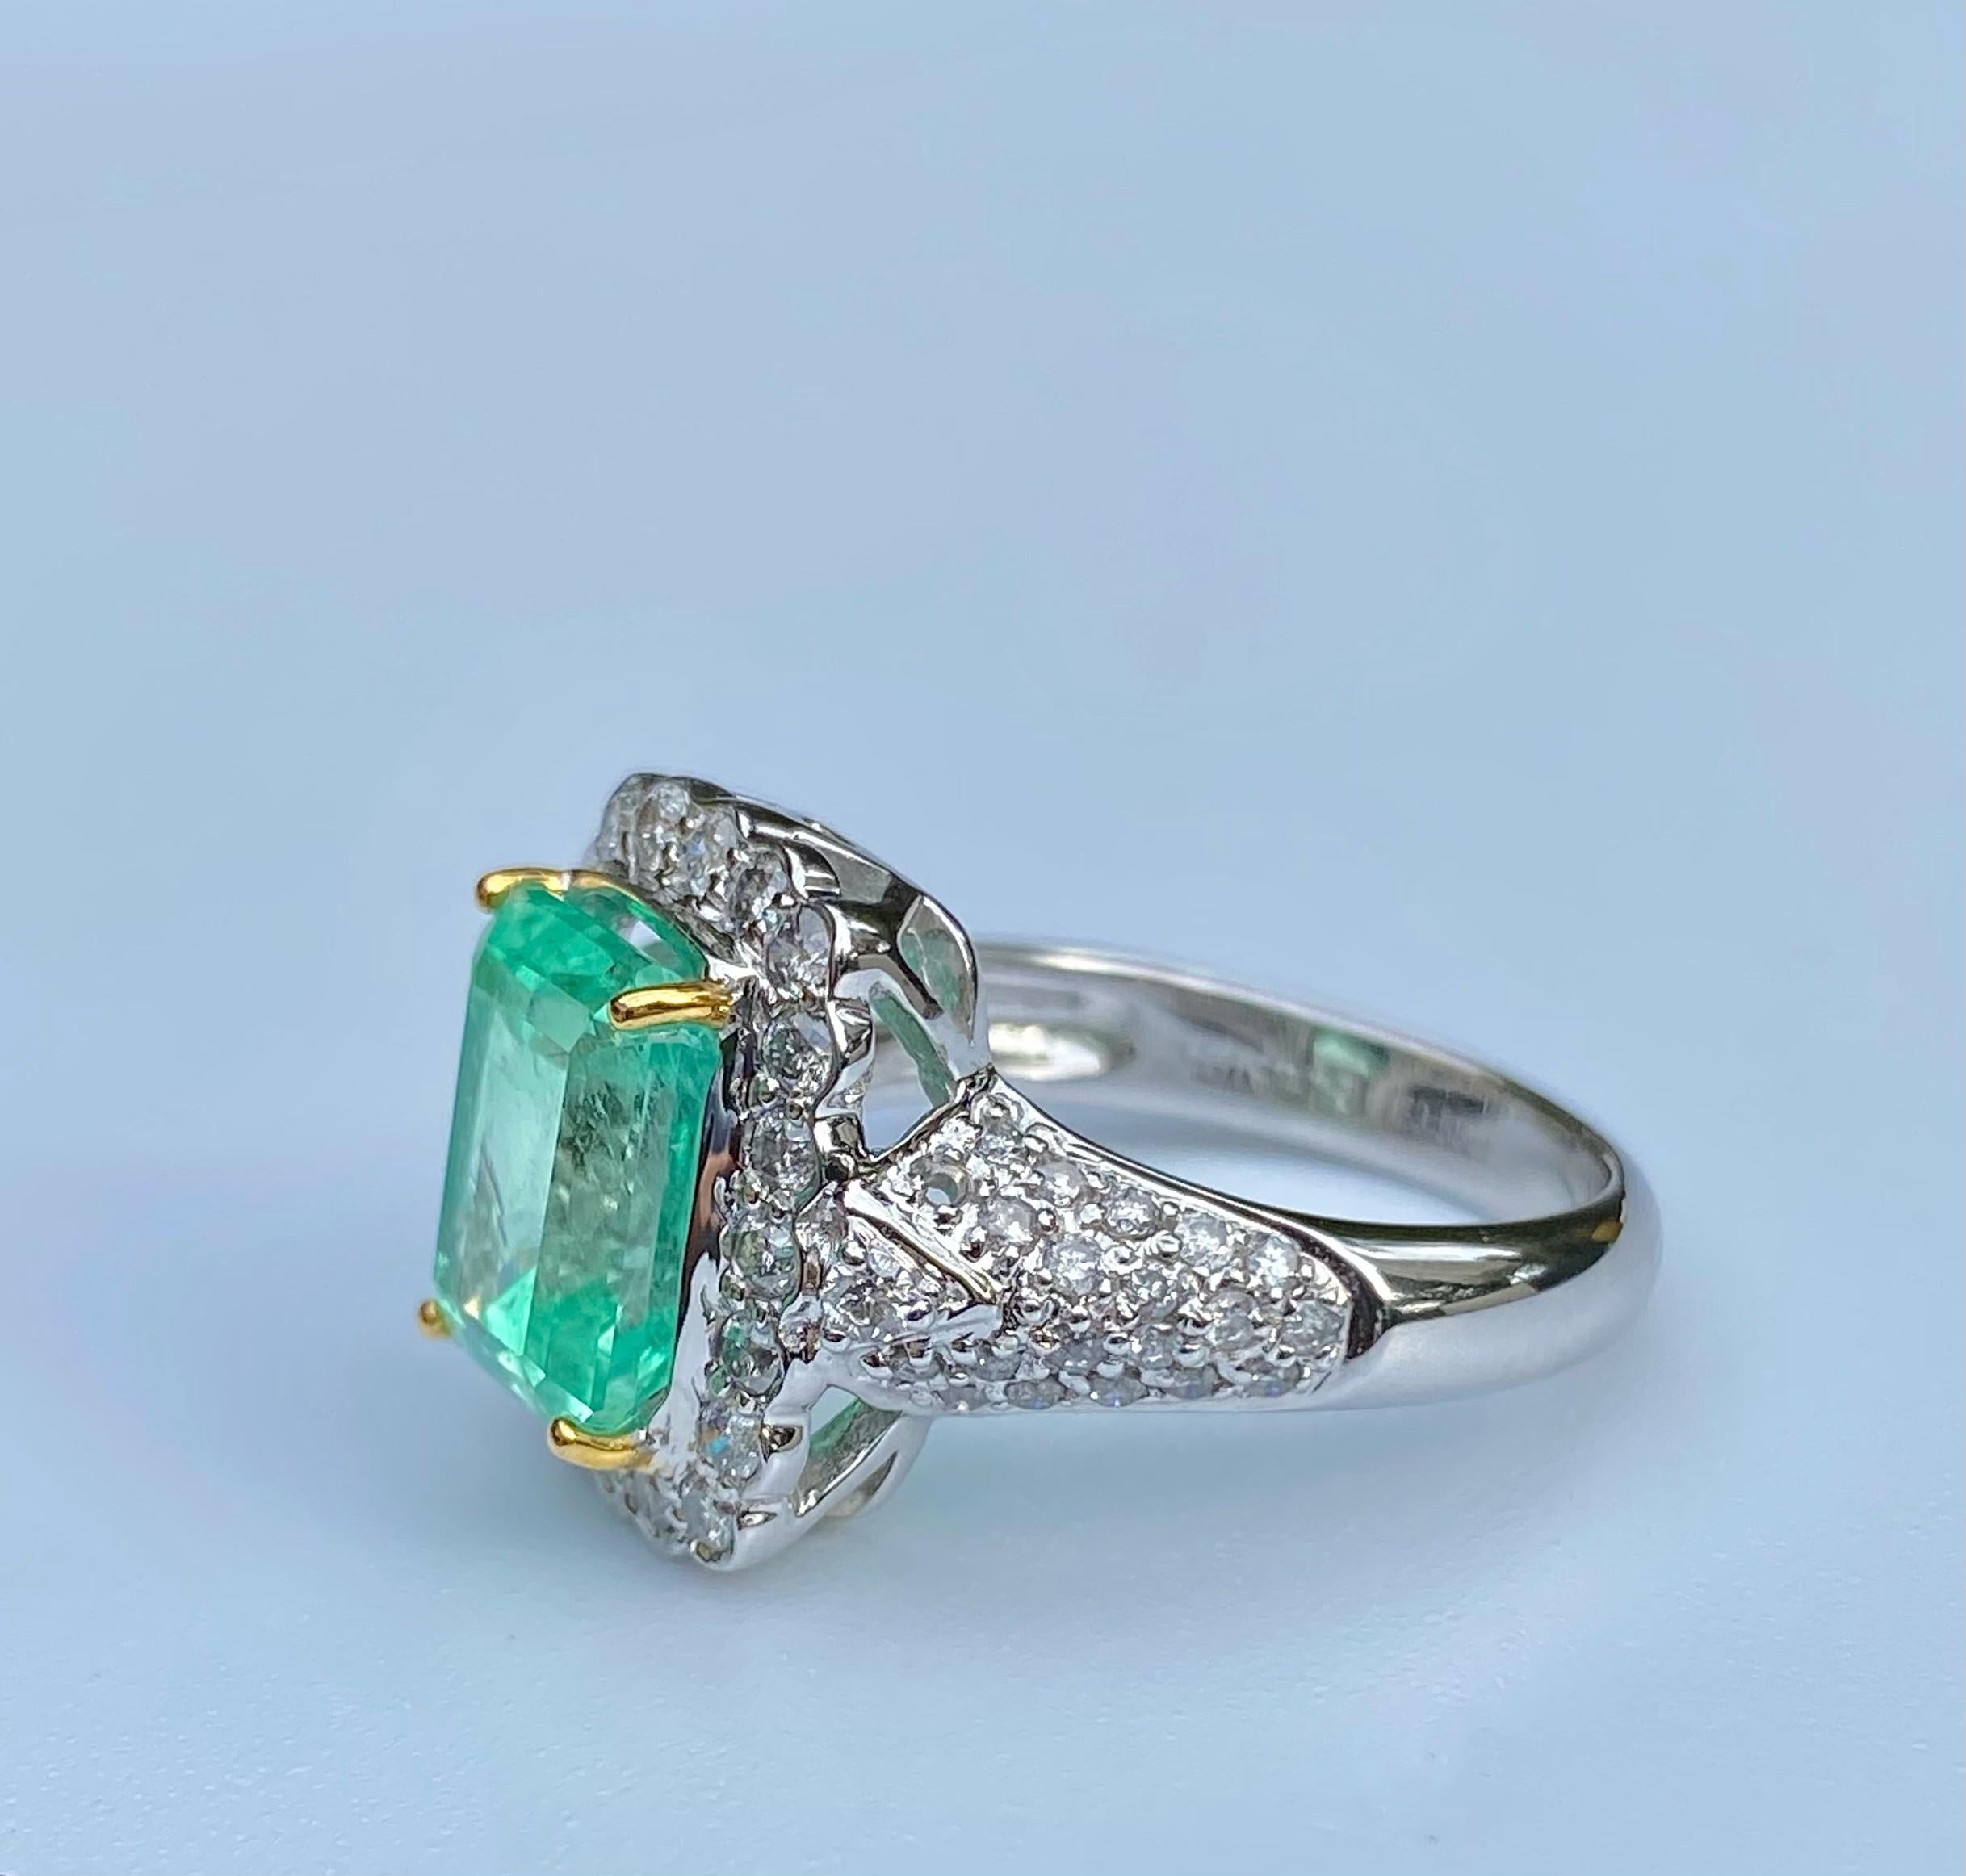 3.58 Carat Emerald-Cut Colombian Emerald in 18 Karat White Gold Ring For Sale 1